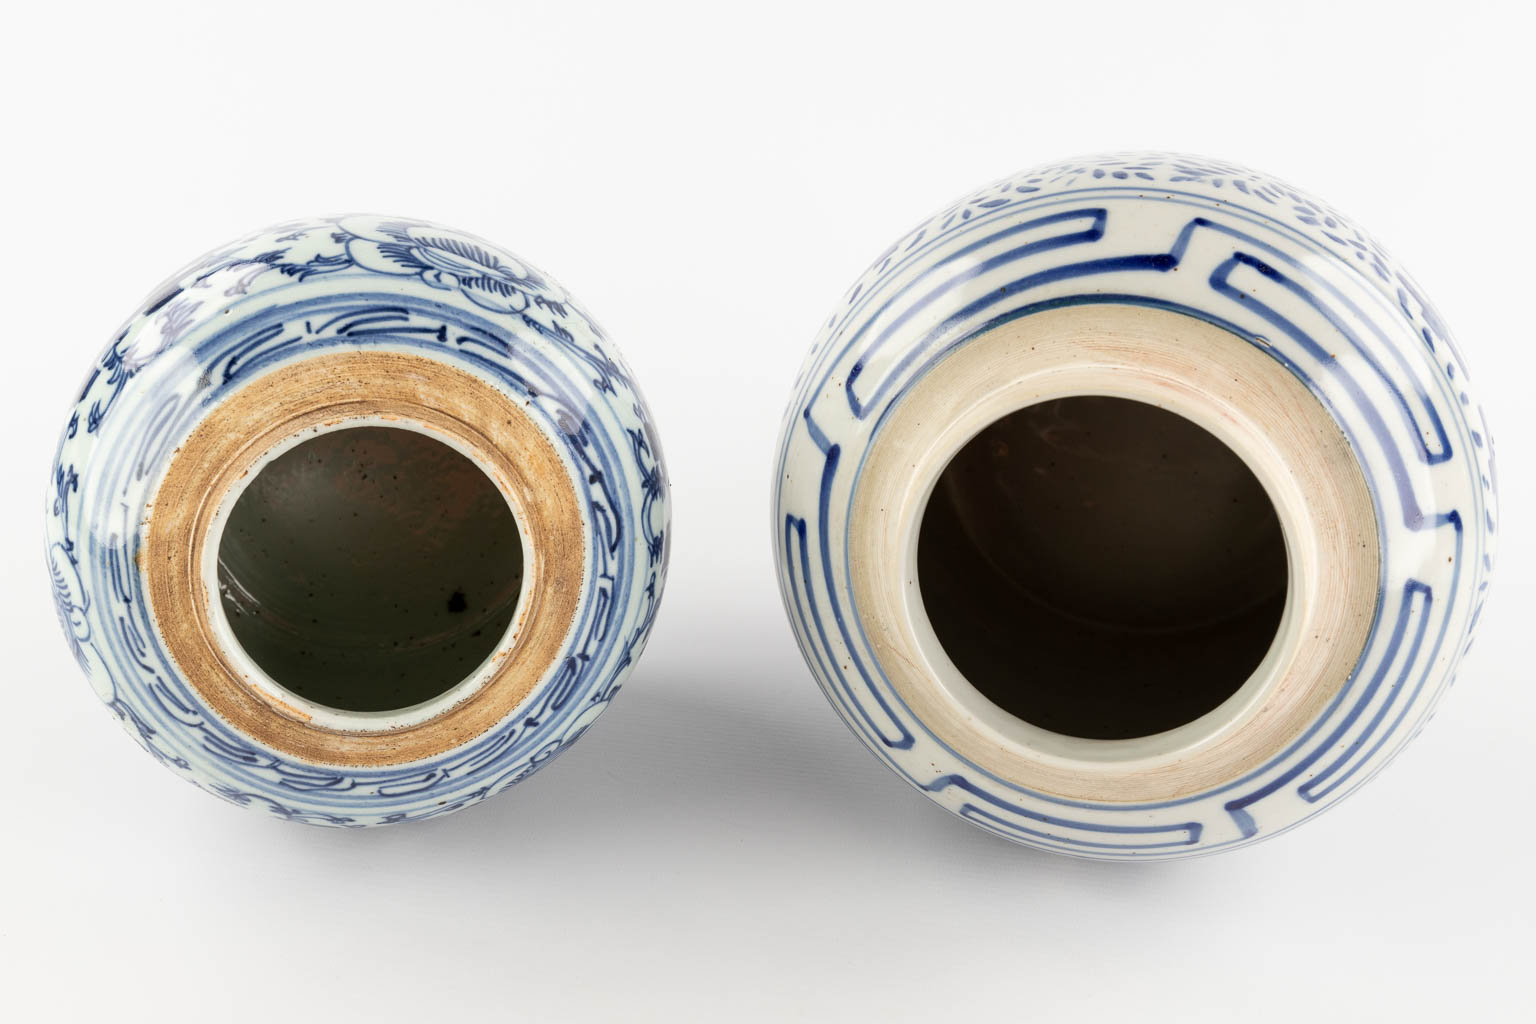 Two Chinese ginger jars with a blue-white decor of Happiness, Double Xi sign. 19th/20th C. (H:27 x D:20 cm)